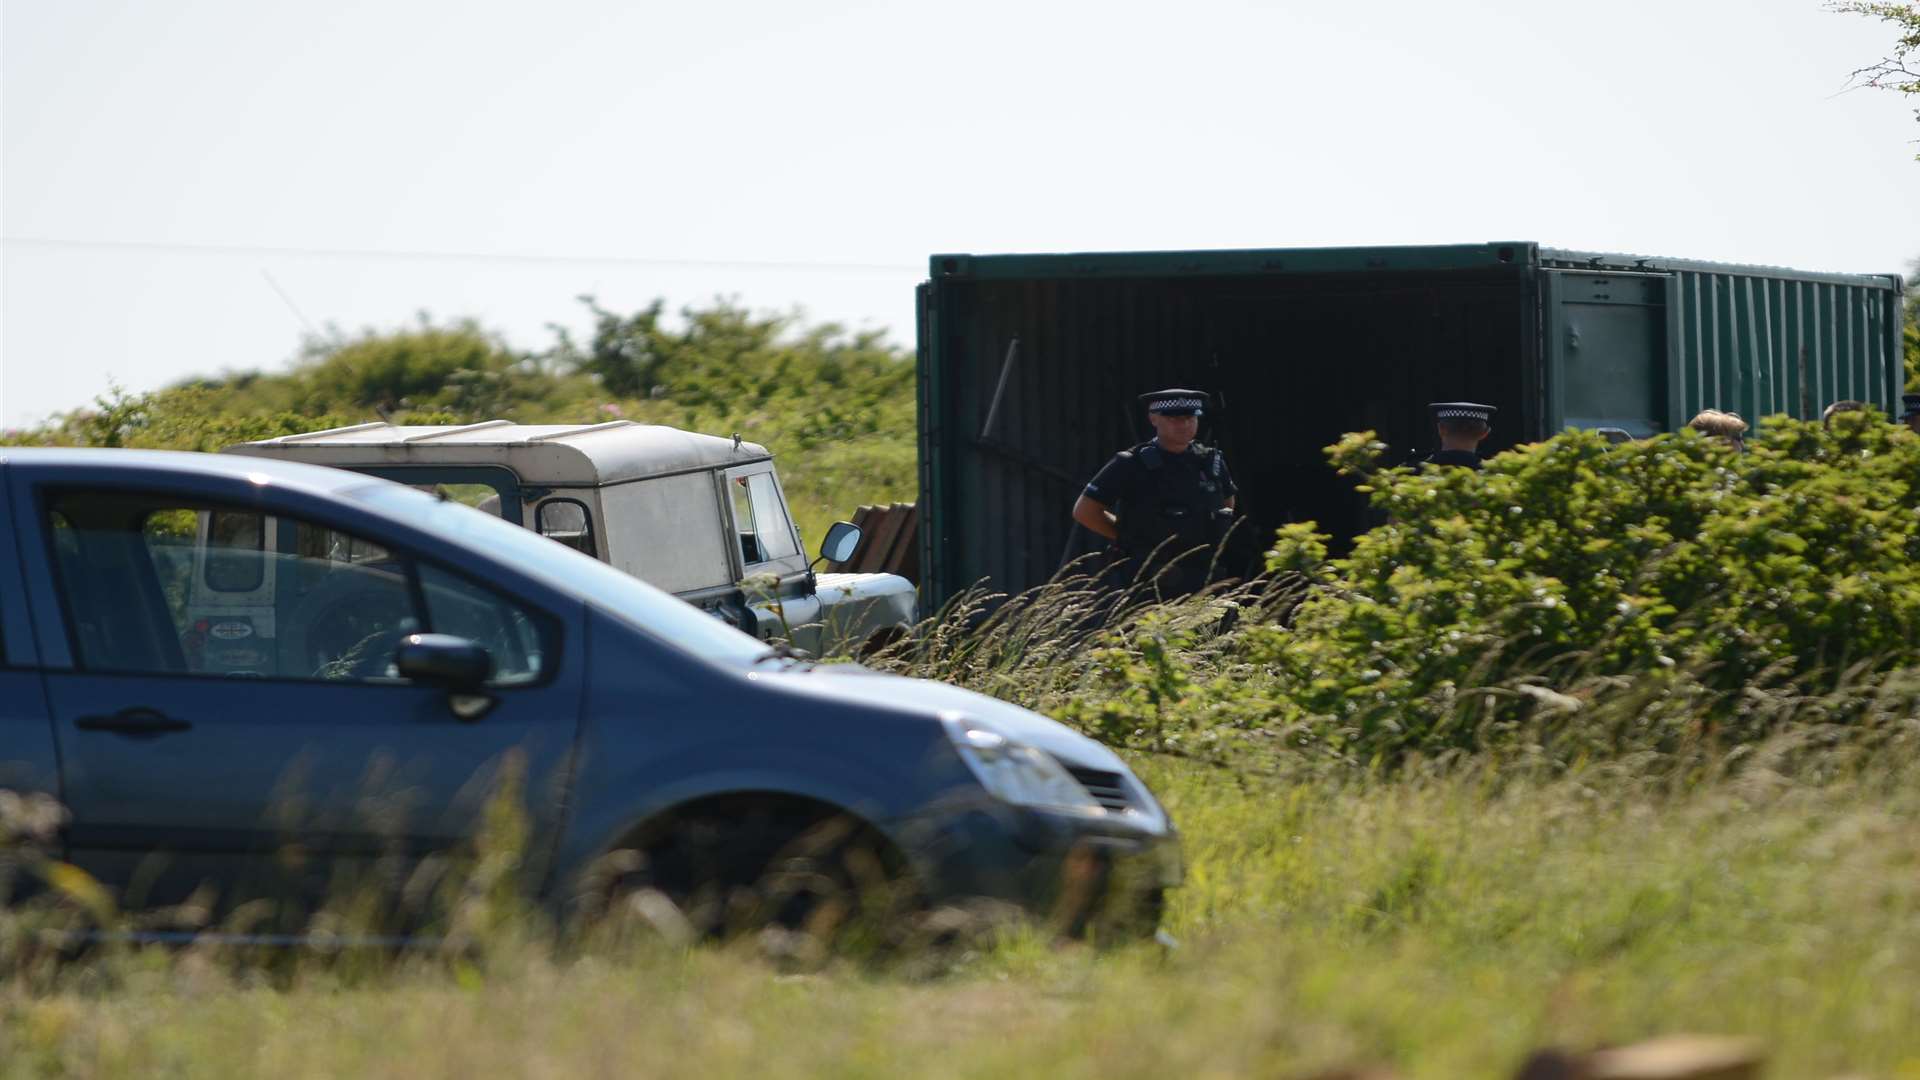 Police at the scene of the tragic accident at Capel le Ferne